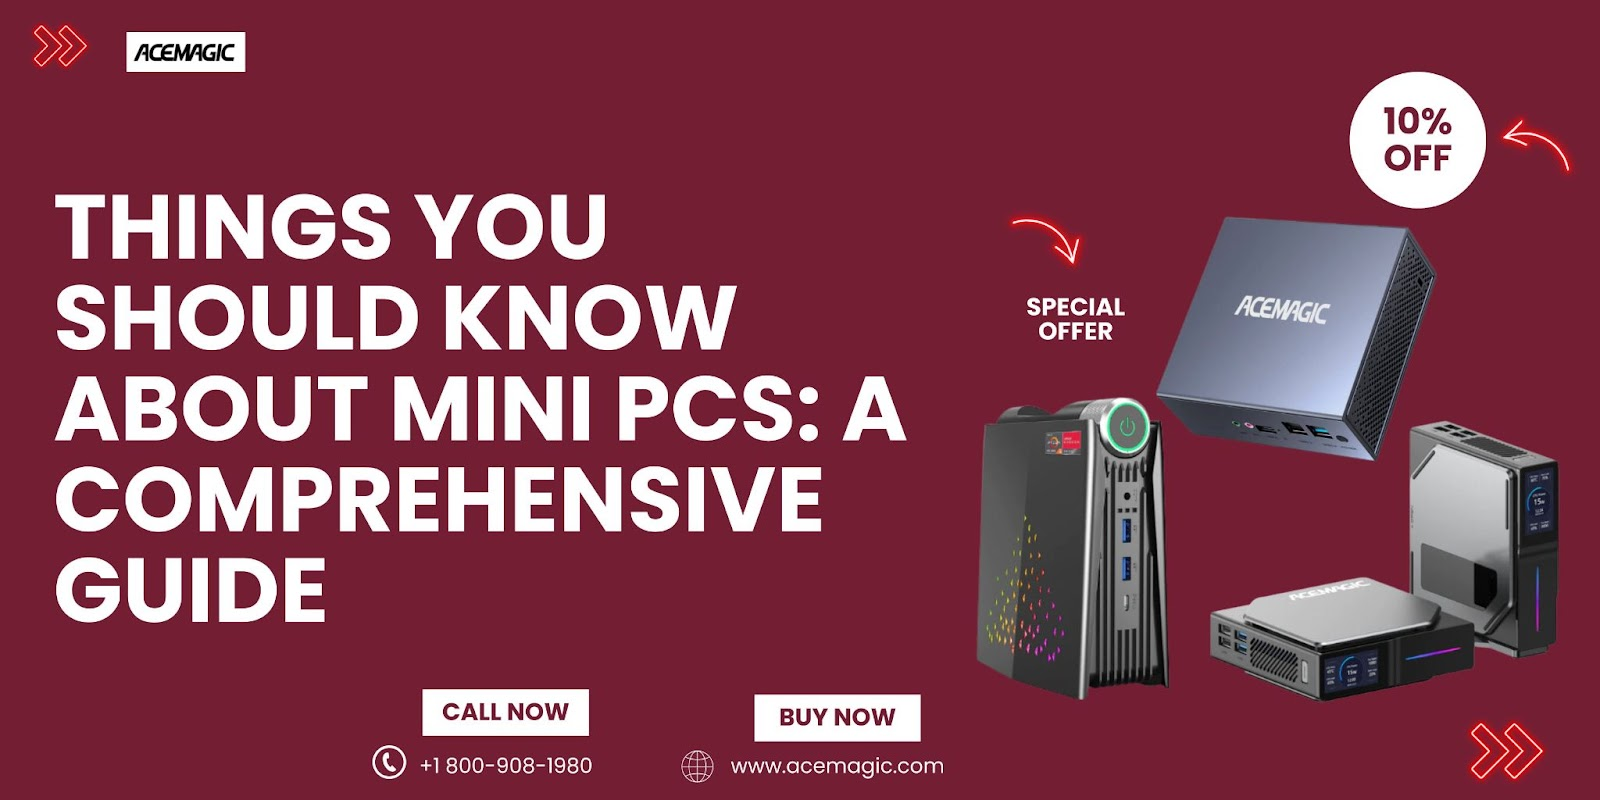 Things You Should Know About Mini PCs: A Comprehensive Guide